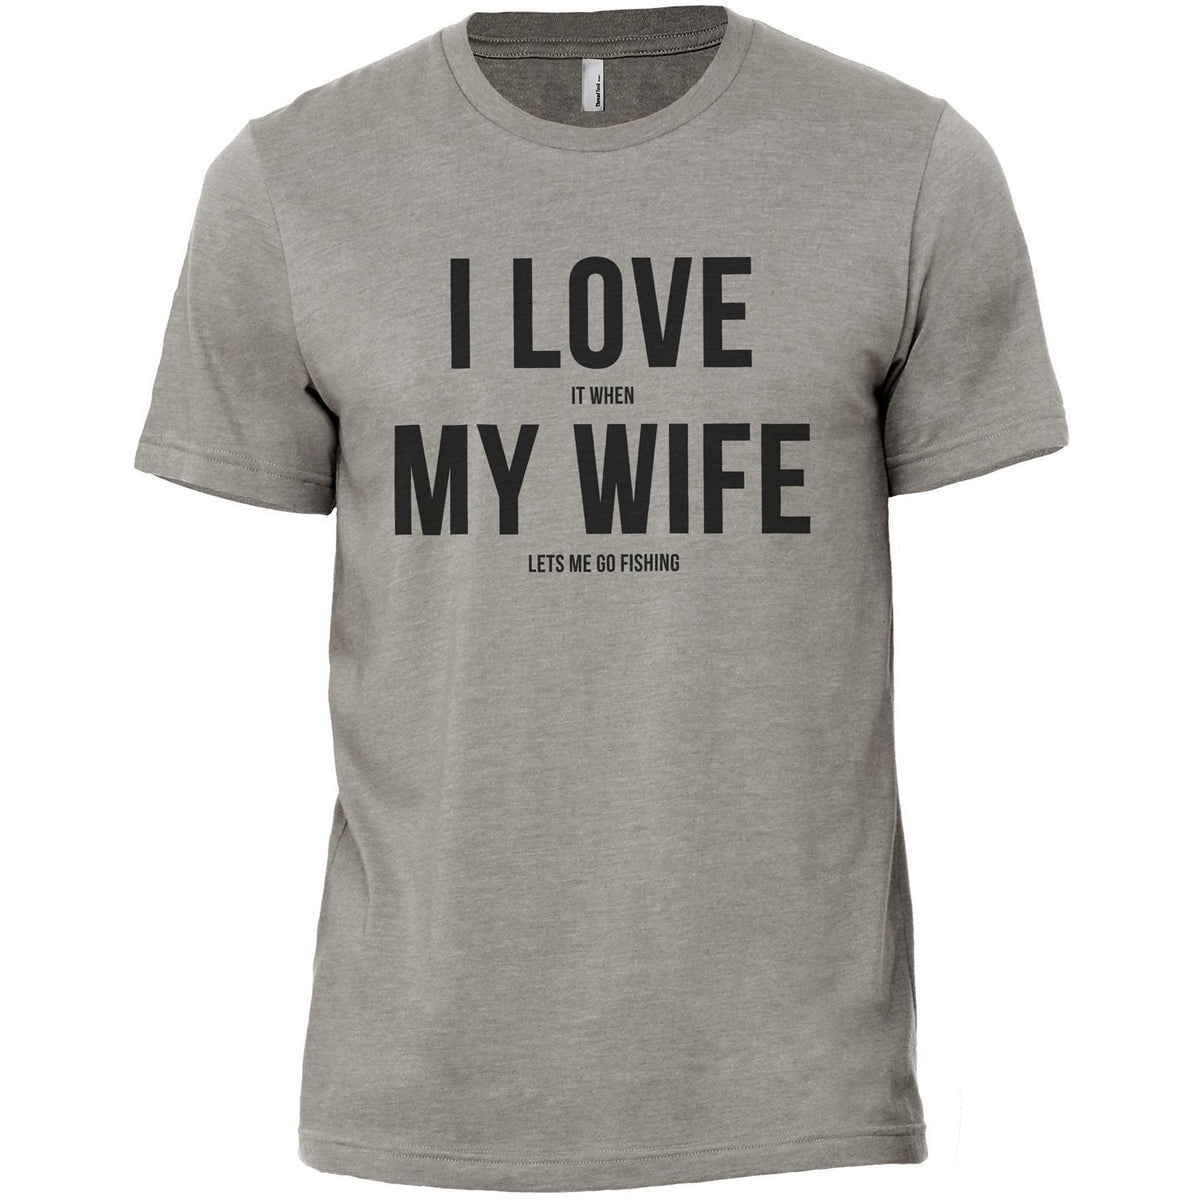 I Love It When My Wife Lets Me Go Fishing Printed Graphic Men's Crew T-Shirt Tee